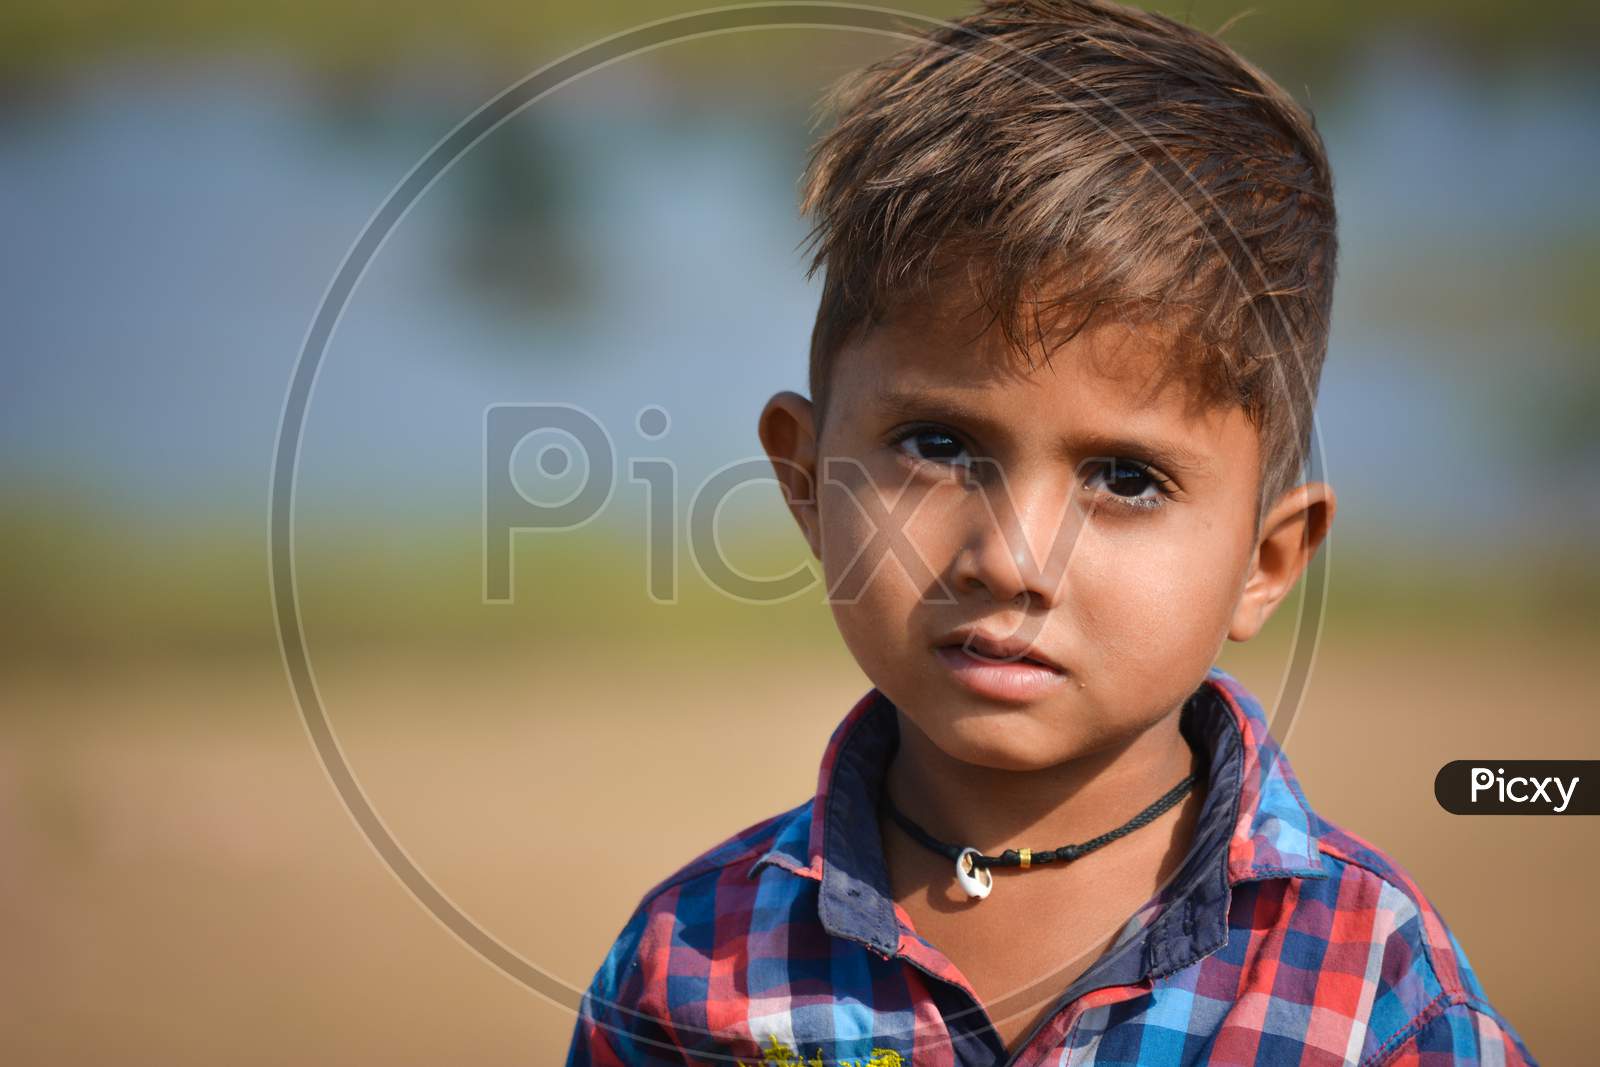 TIKAMGARH, MADHYA PRADESH, INDIA - NOVEMBER 20, 2019: Happy little indian boy with expression in outdoor.